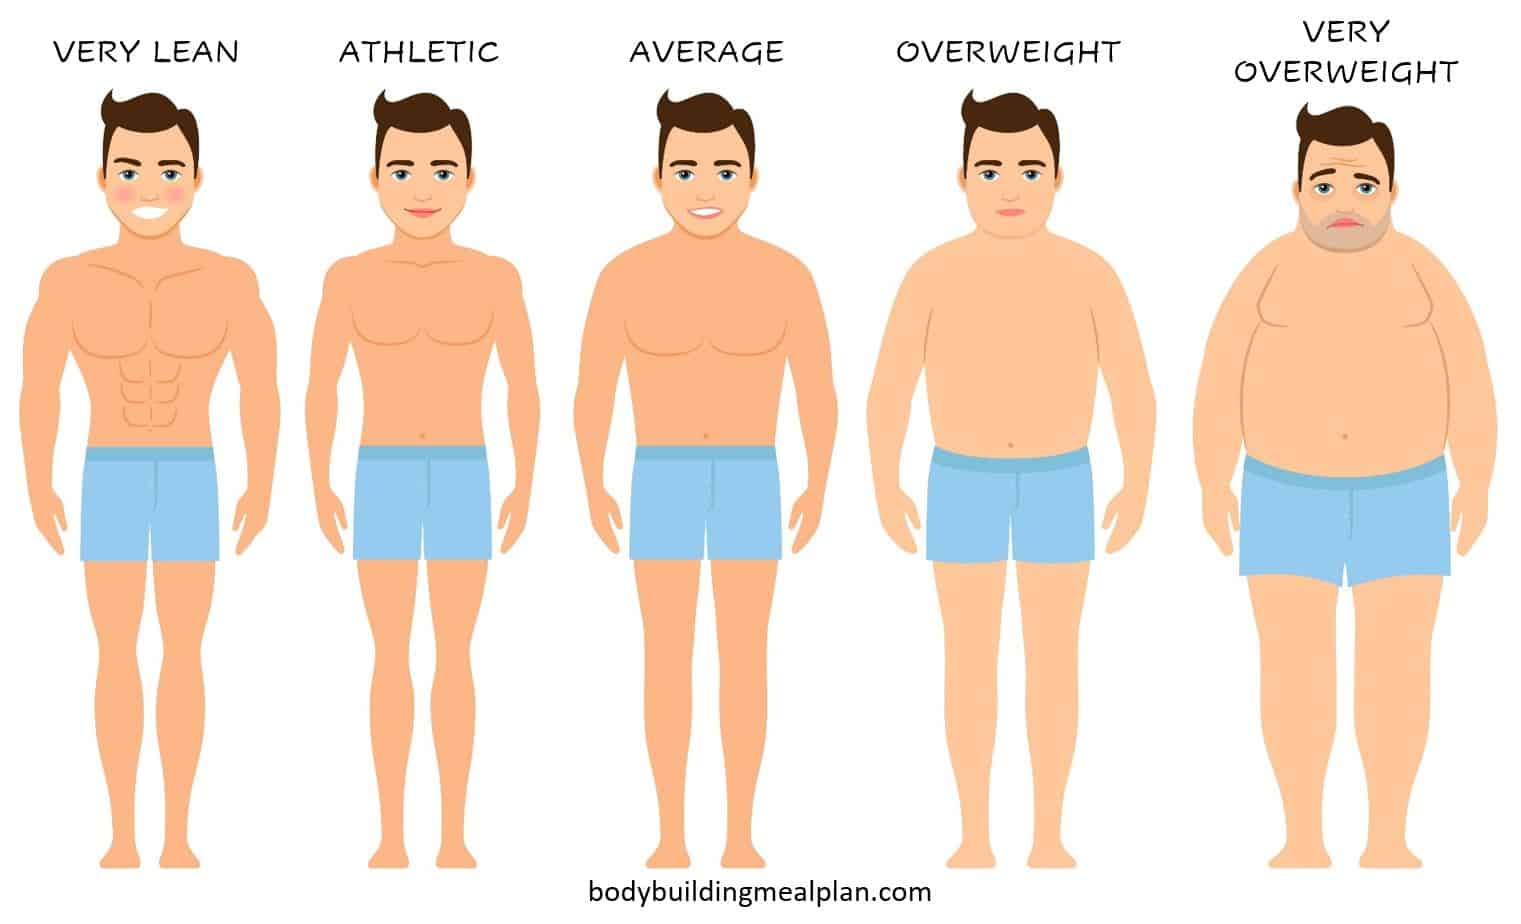 How to Calculate Body Fat Percentage